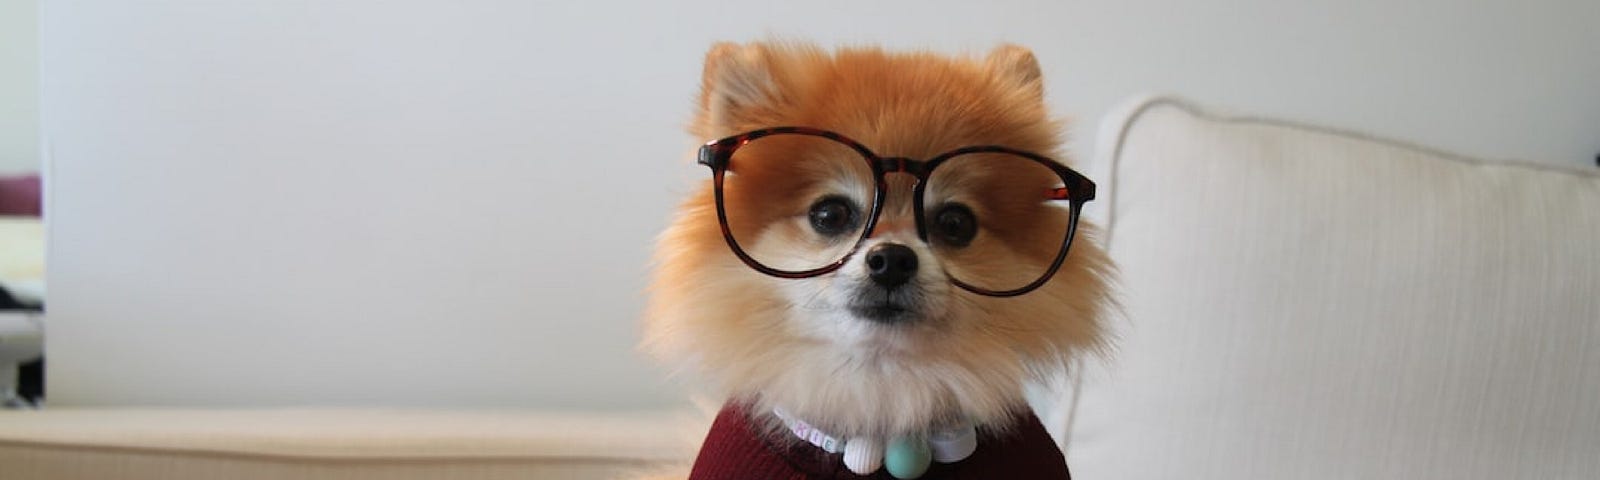 Pomeranian dog wearing a top and glasses hard at work on a laptop